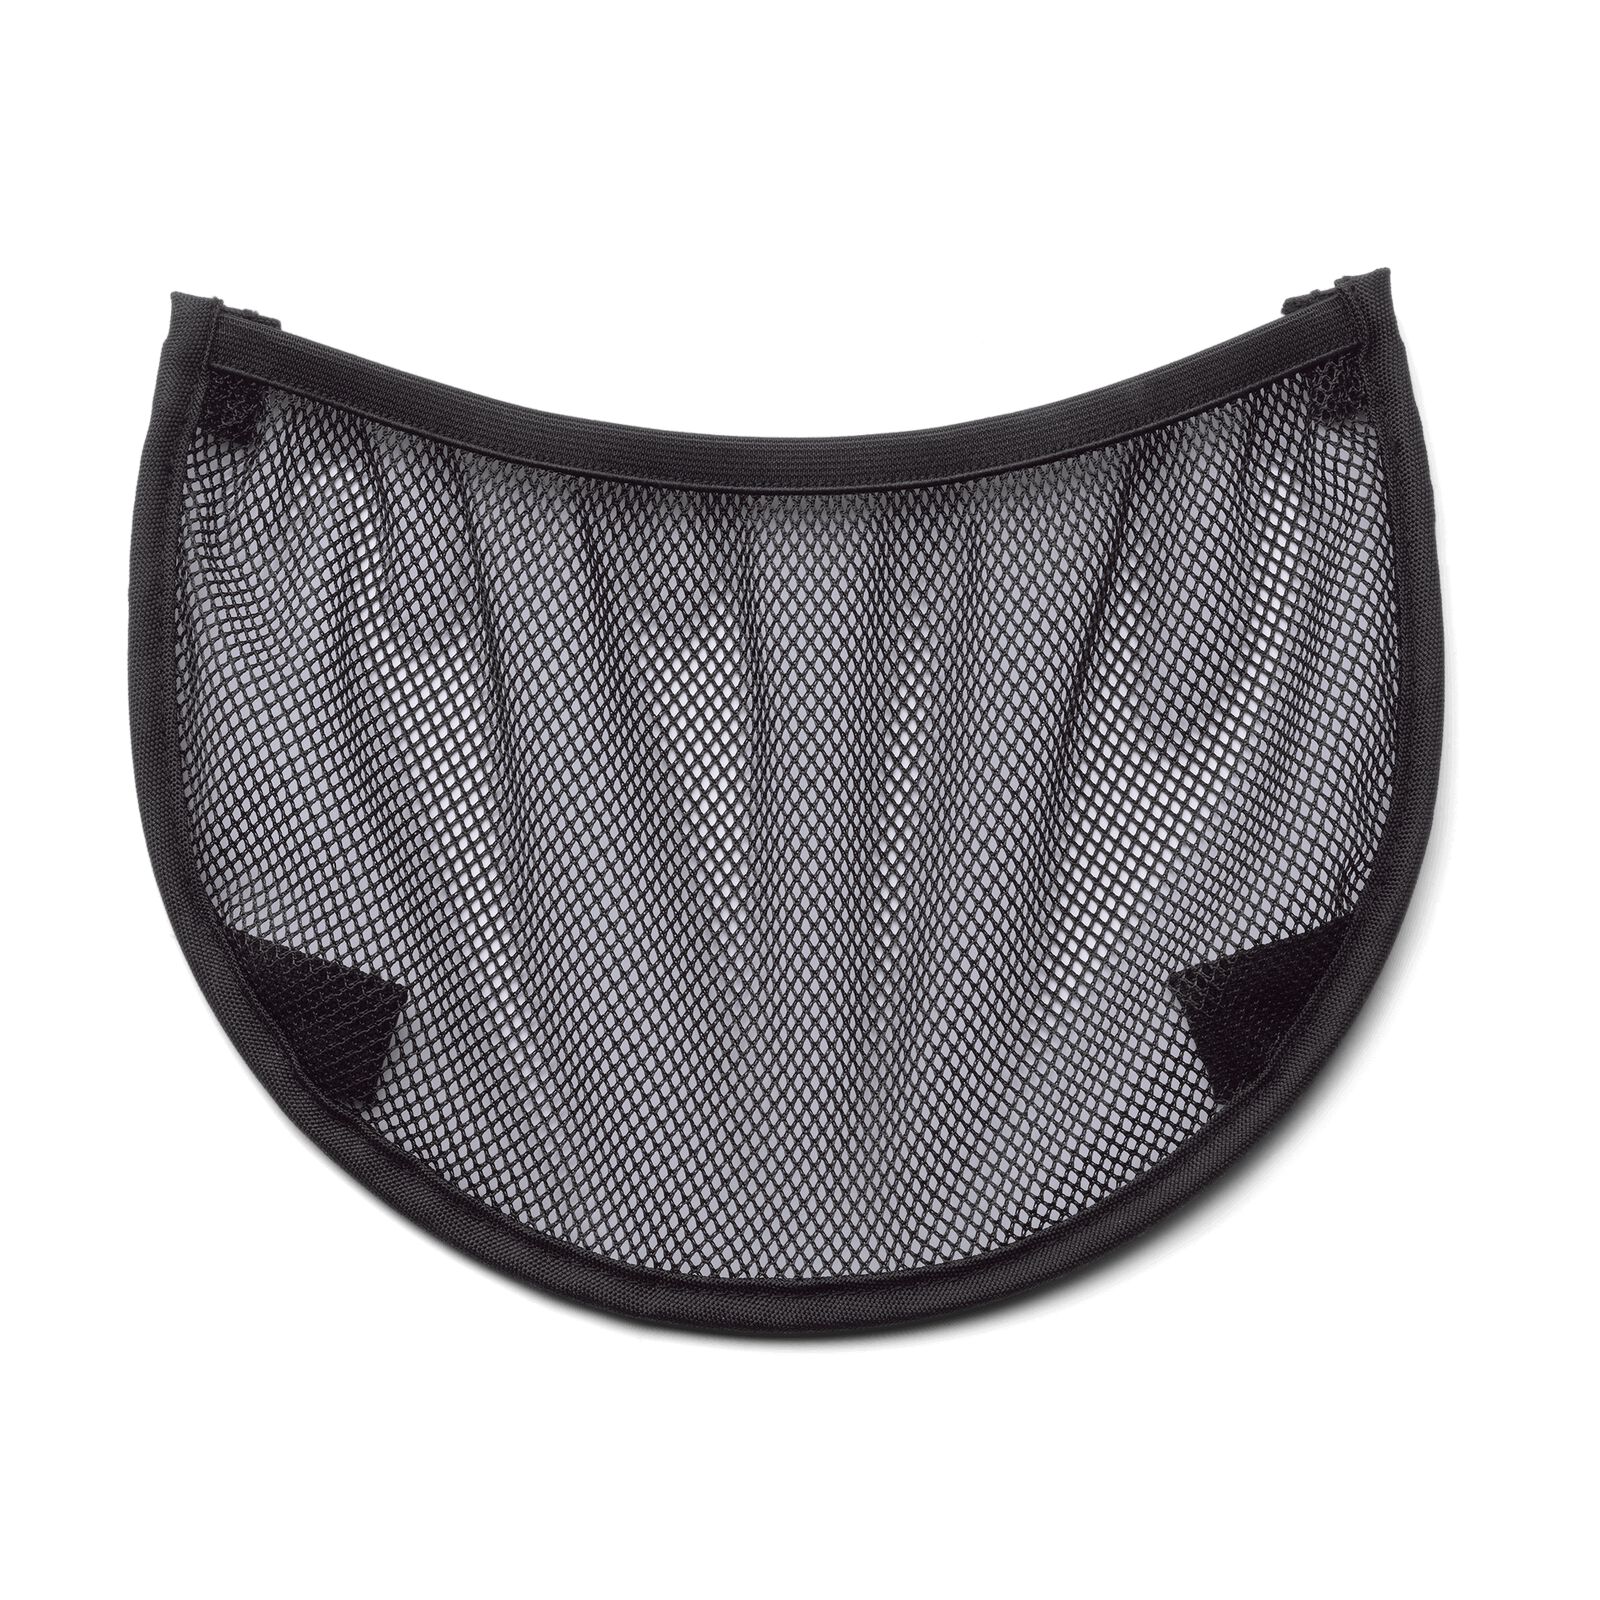 Bugaboo Ant rear luggage basket - View 1